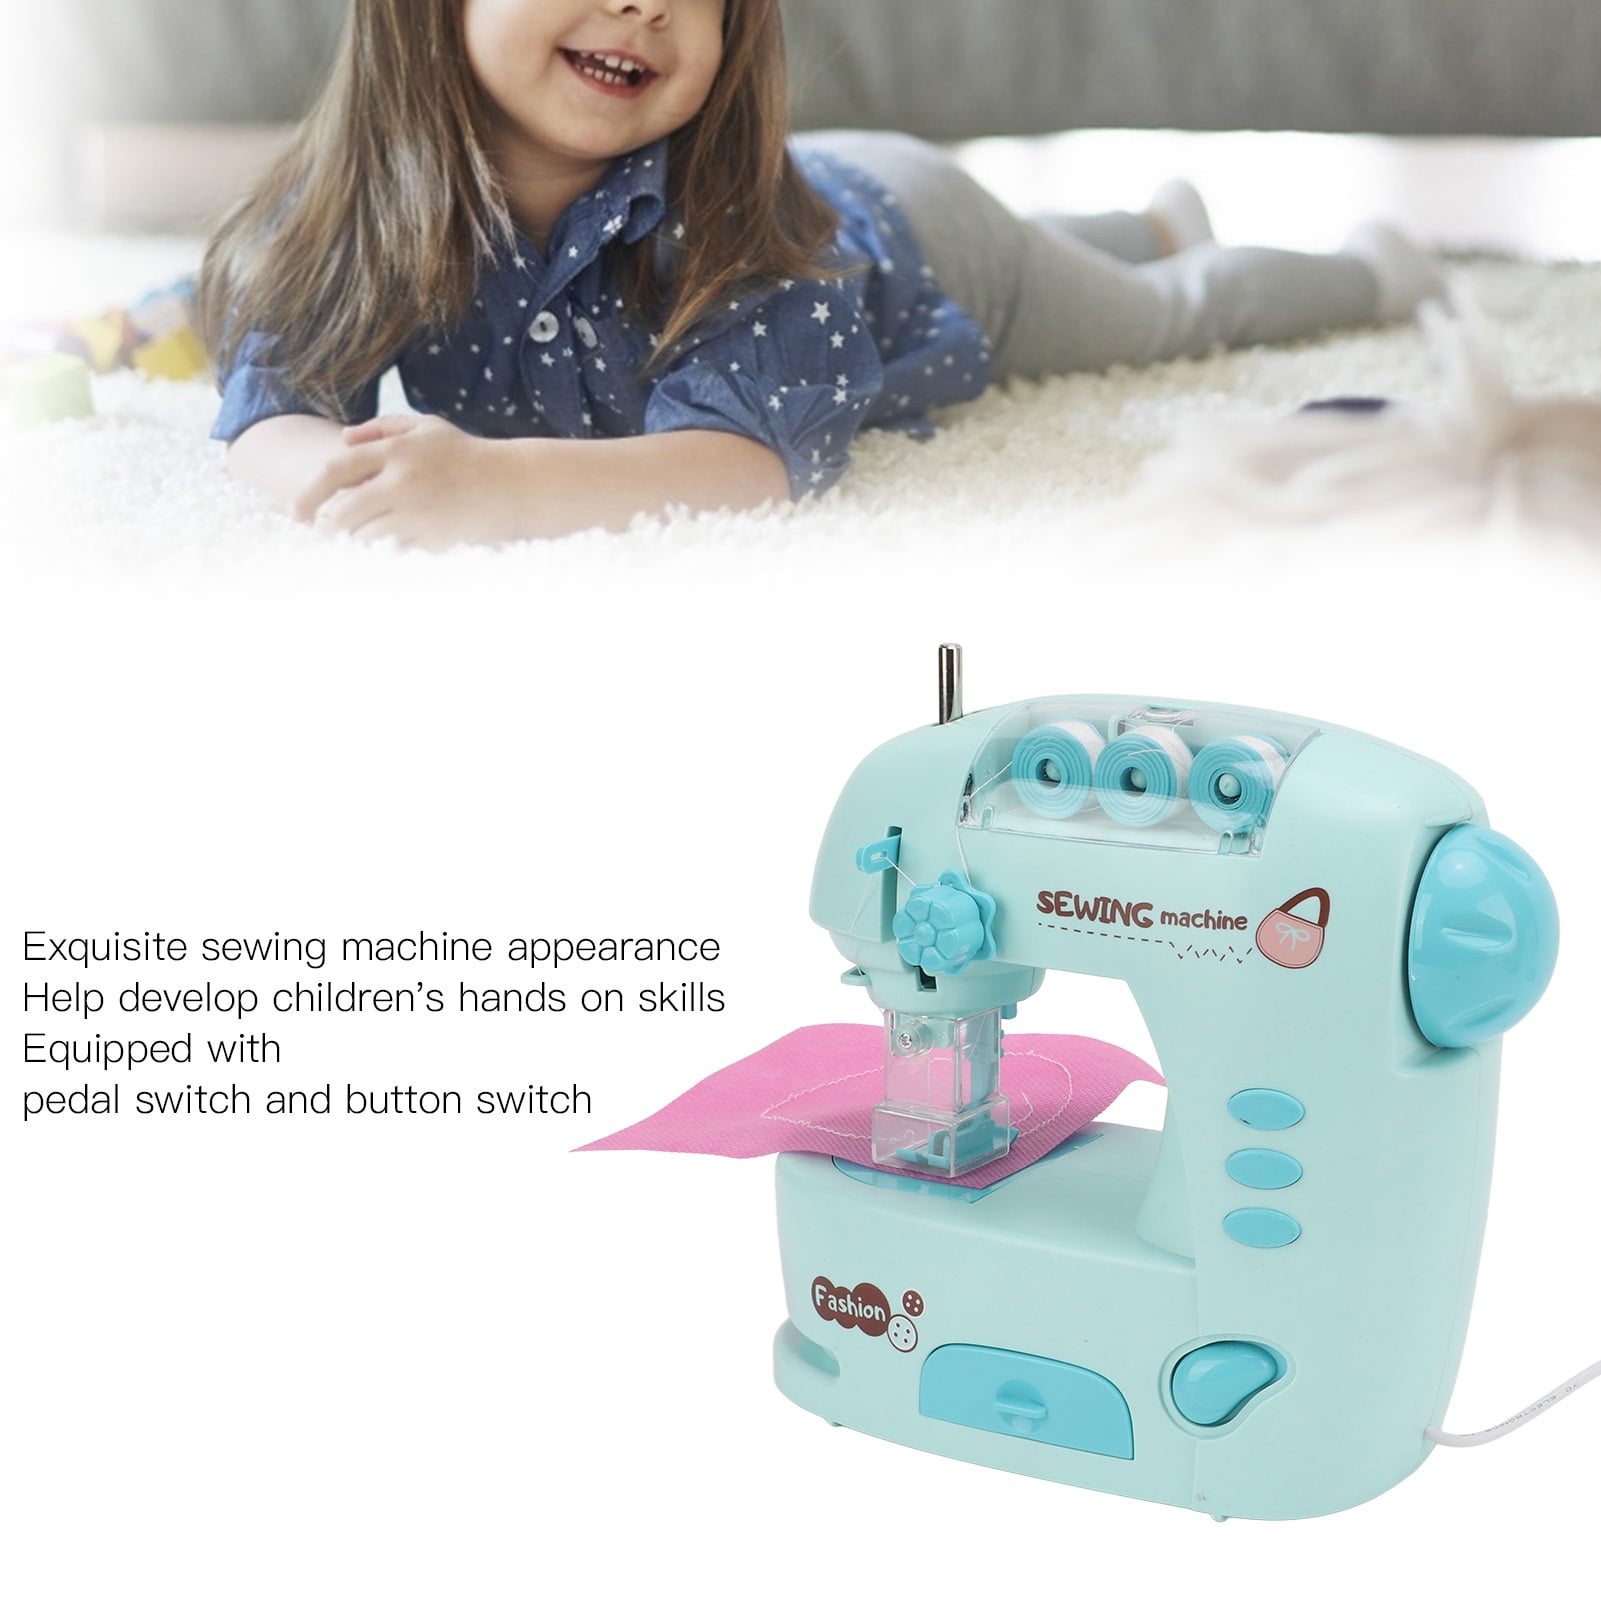 863 Mini Kid's Sewing Machine Educational Interesting Toy Portable Electric DIY Sewing Machine Small Multi-function Mending Machine for Children 